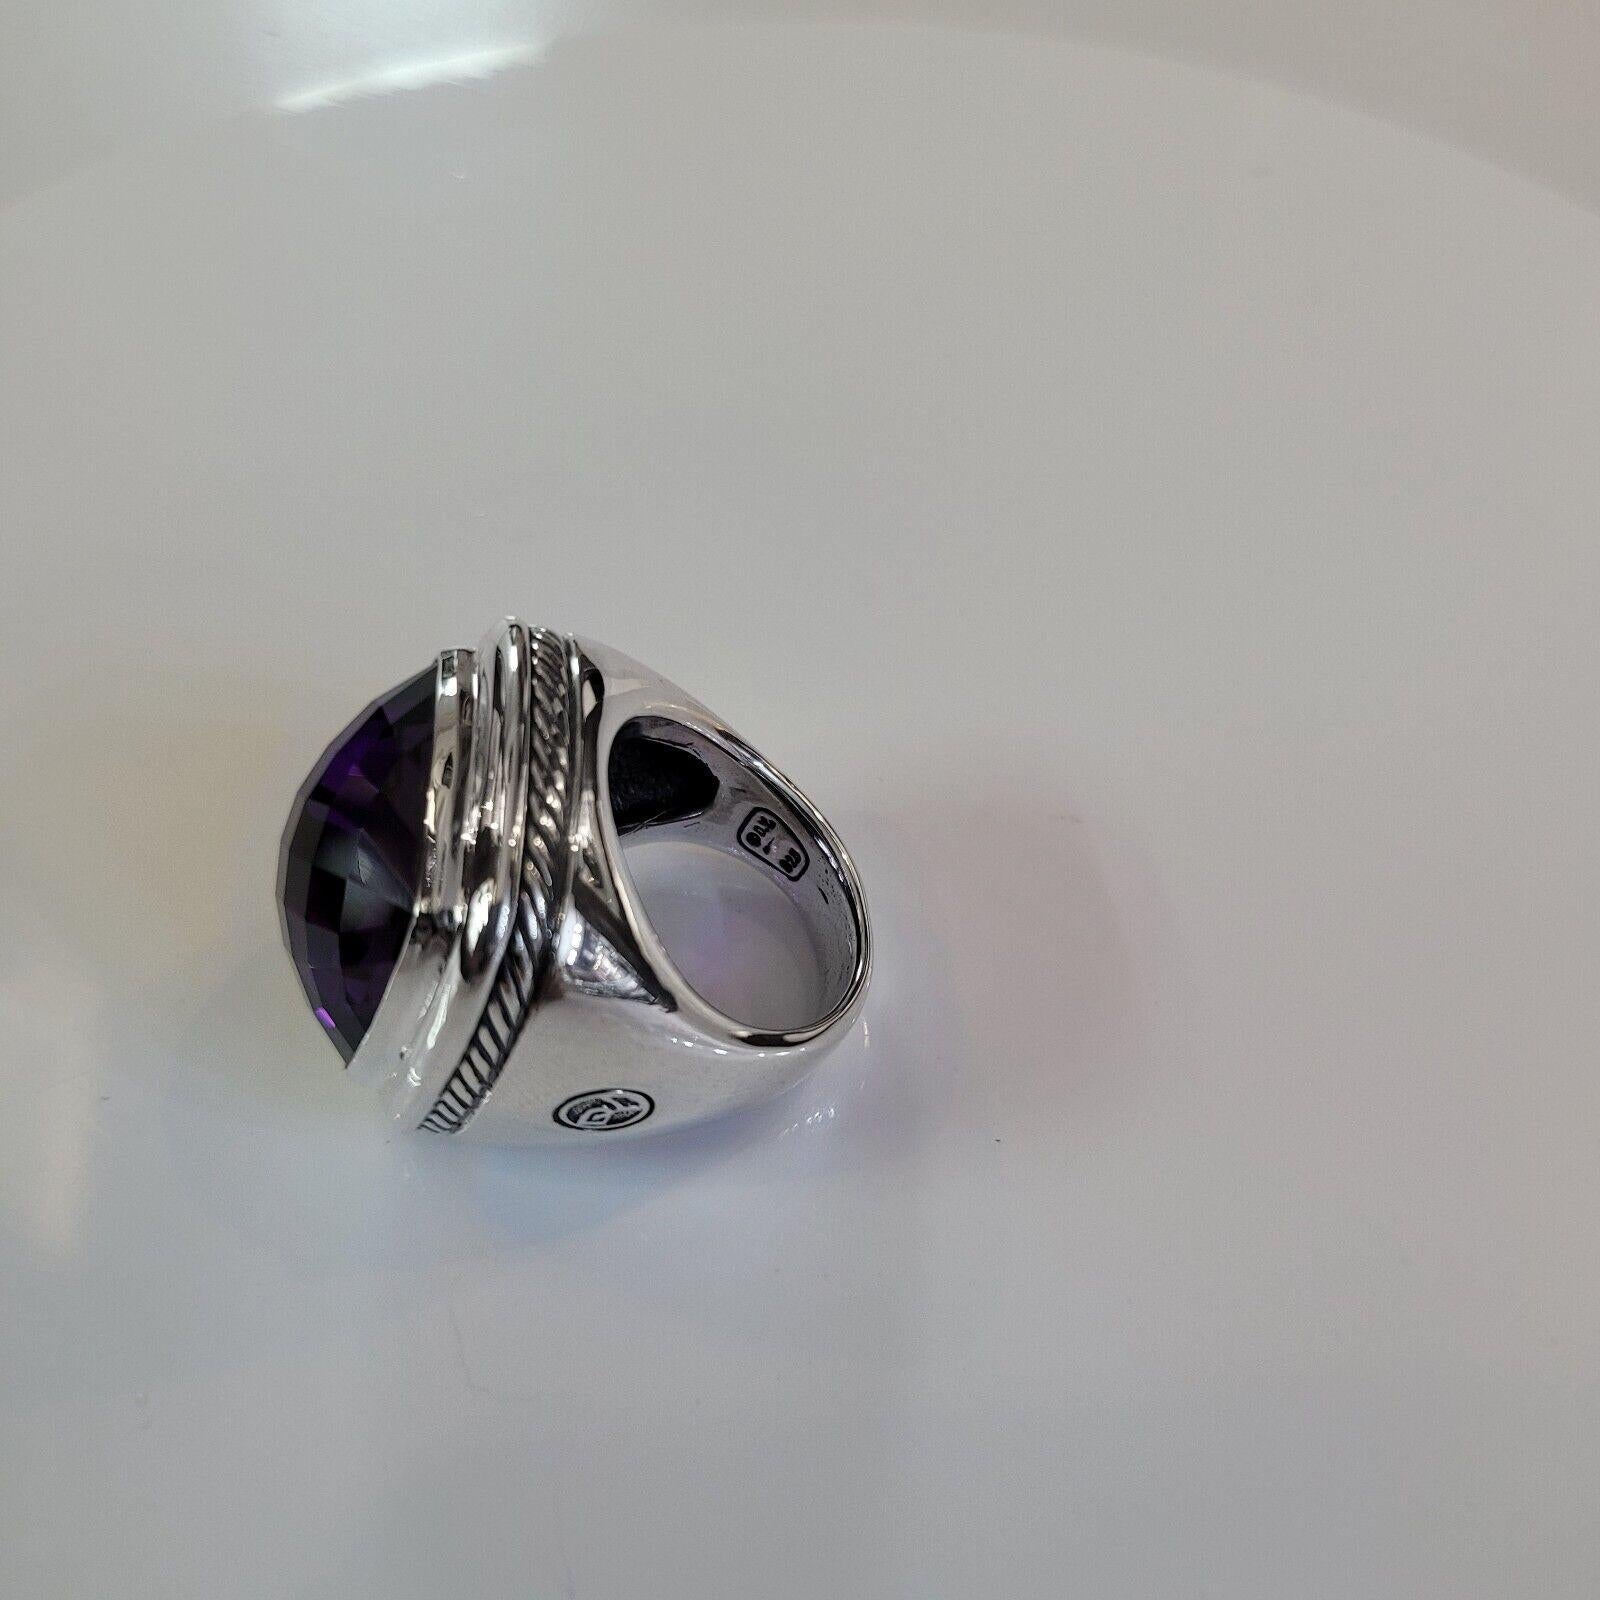 Categories :Women
Category :Jewelry
Sub-category :Rings
Designer :David  Yurman
Condition :Very good  
Material :Silver
Color :Purple
Size:8 US
Location :United States, from the seller joseph